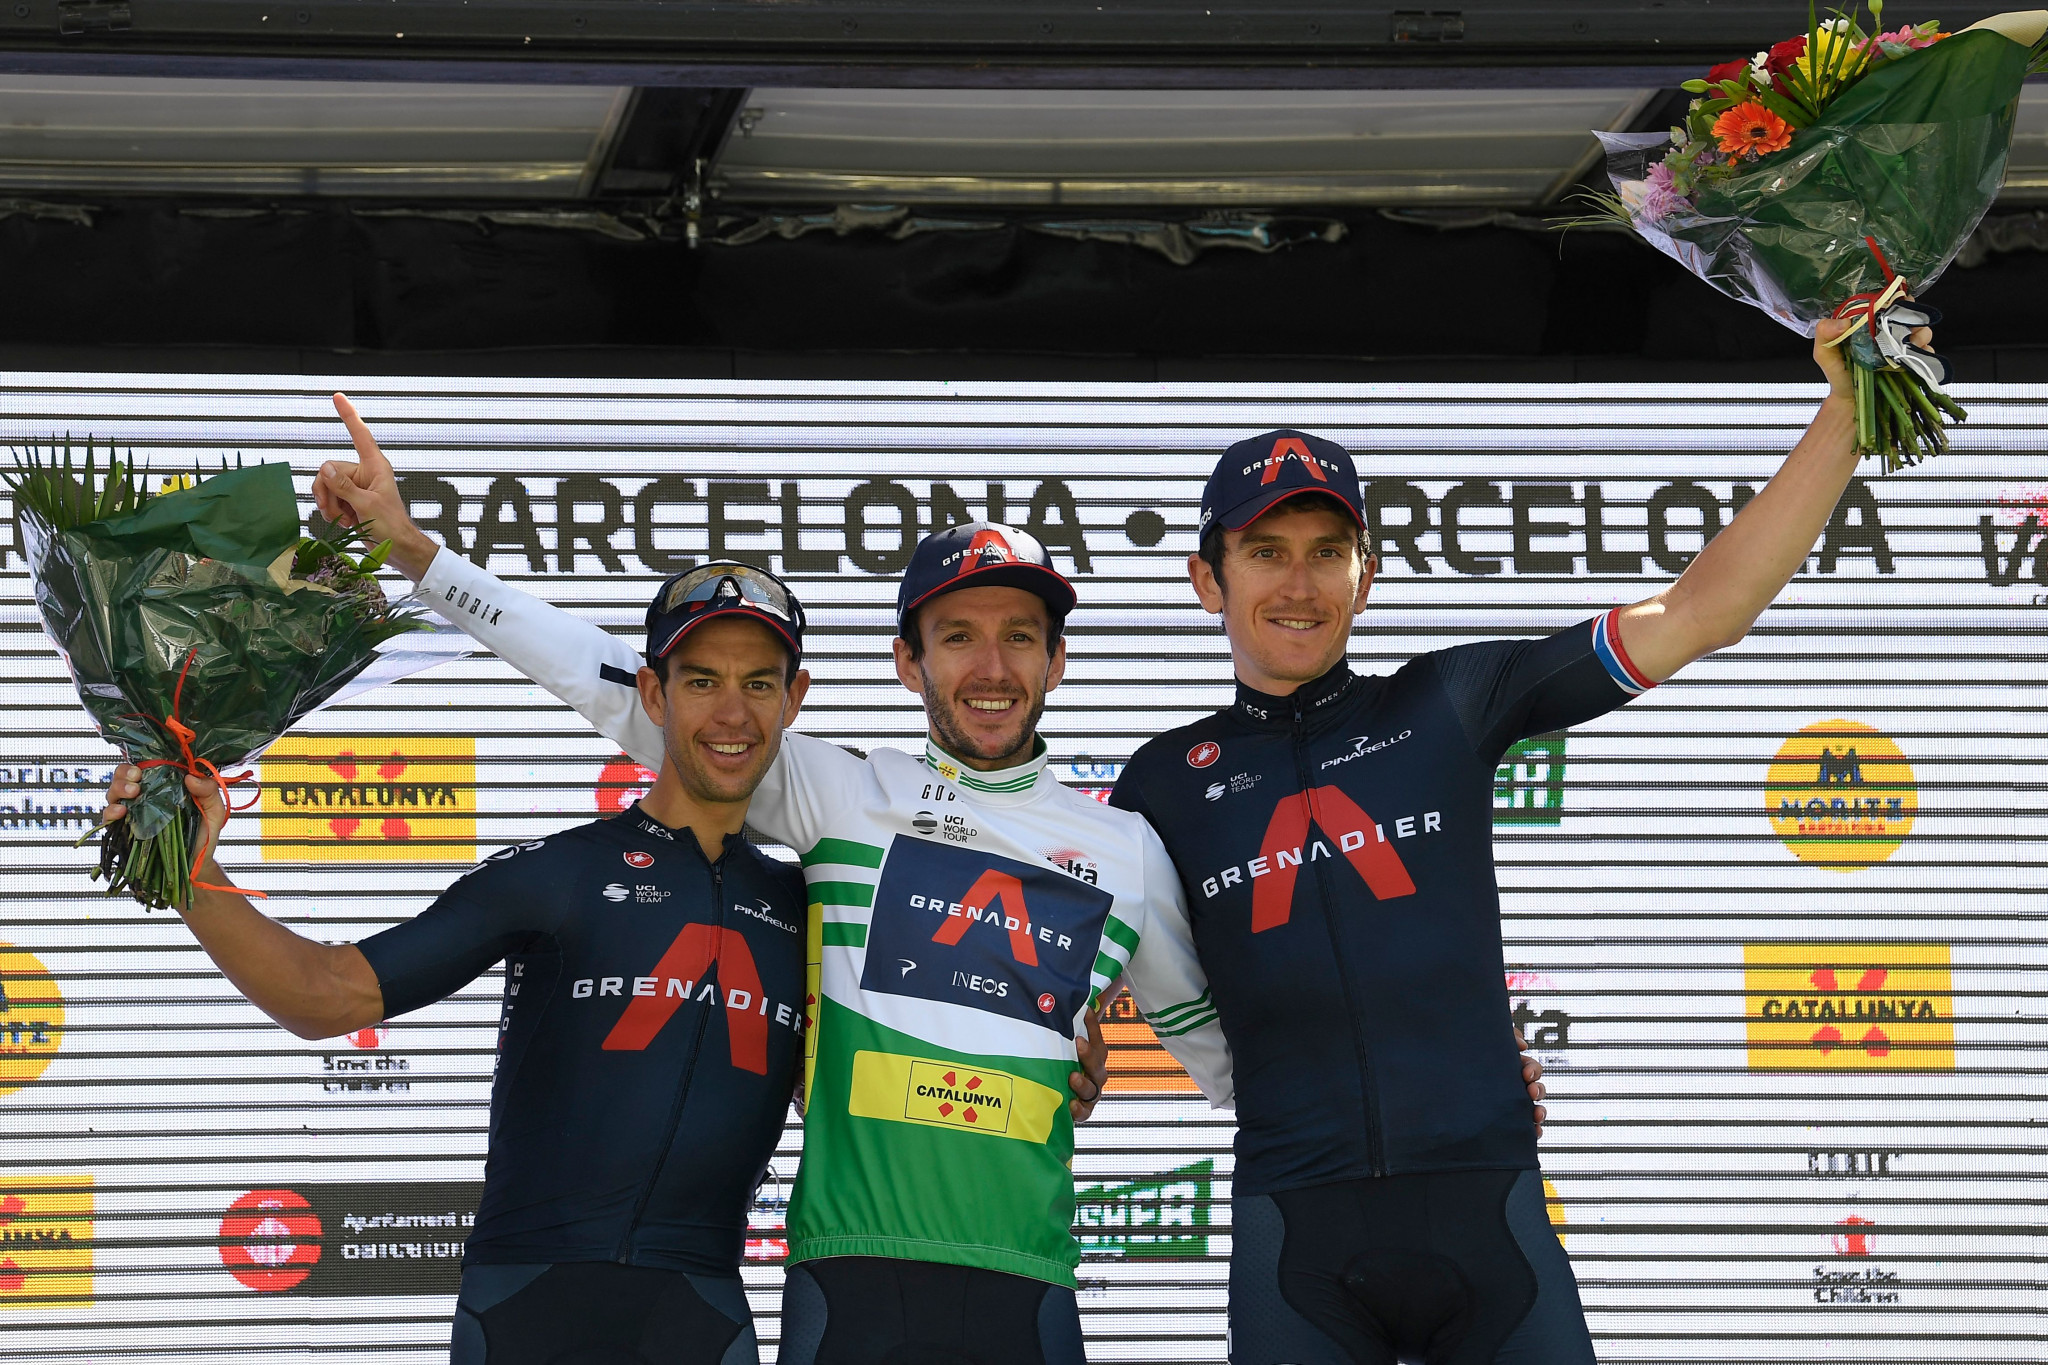 Yates leads Ineos Grenadiers podium sweep at Volta a Catalunya as De Gendt claims final stage